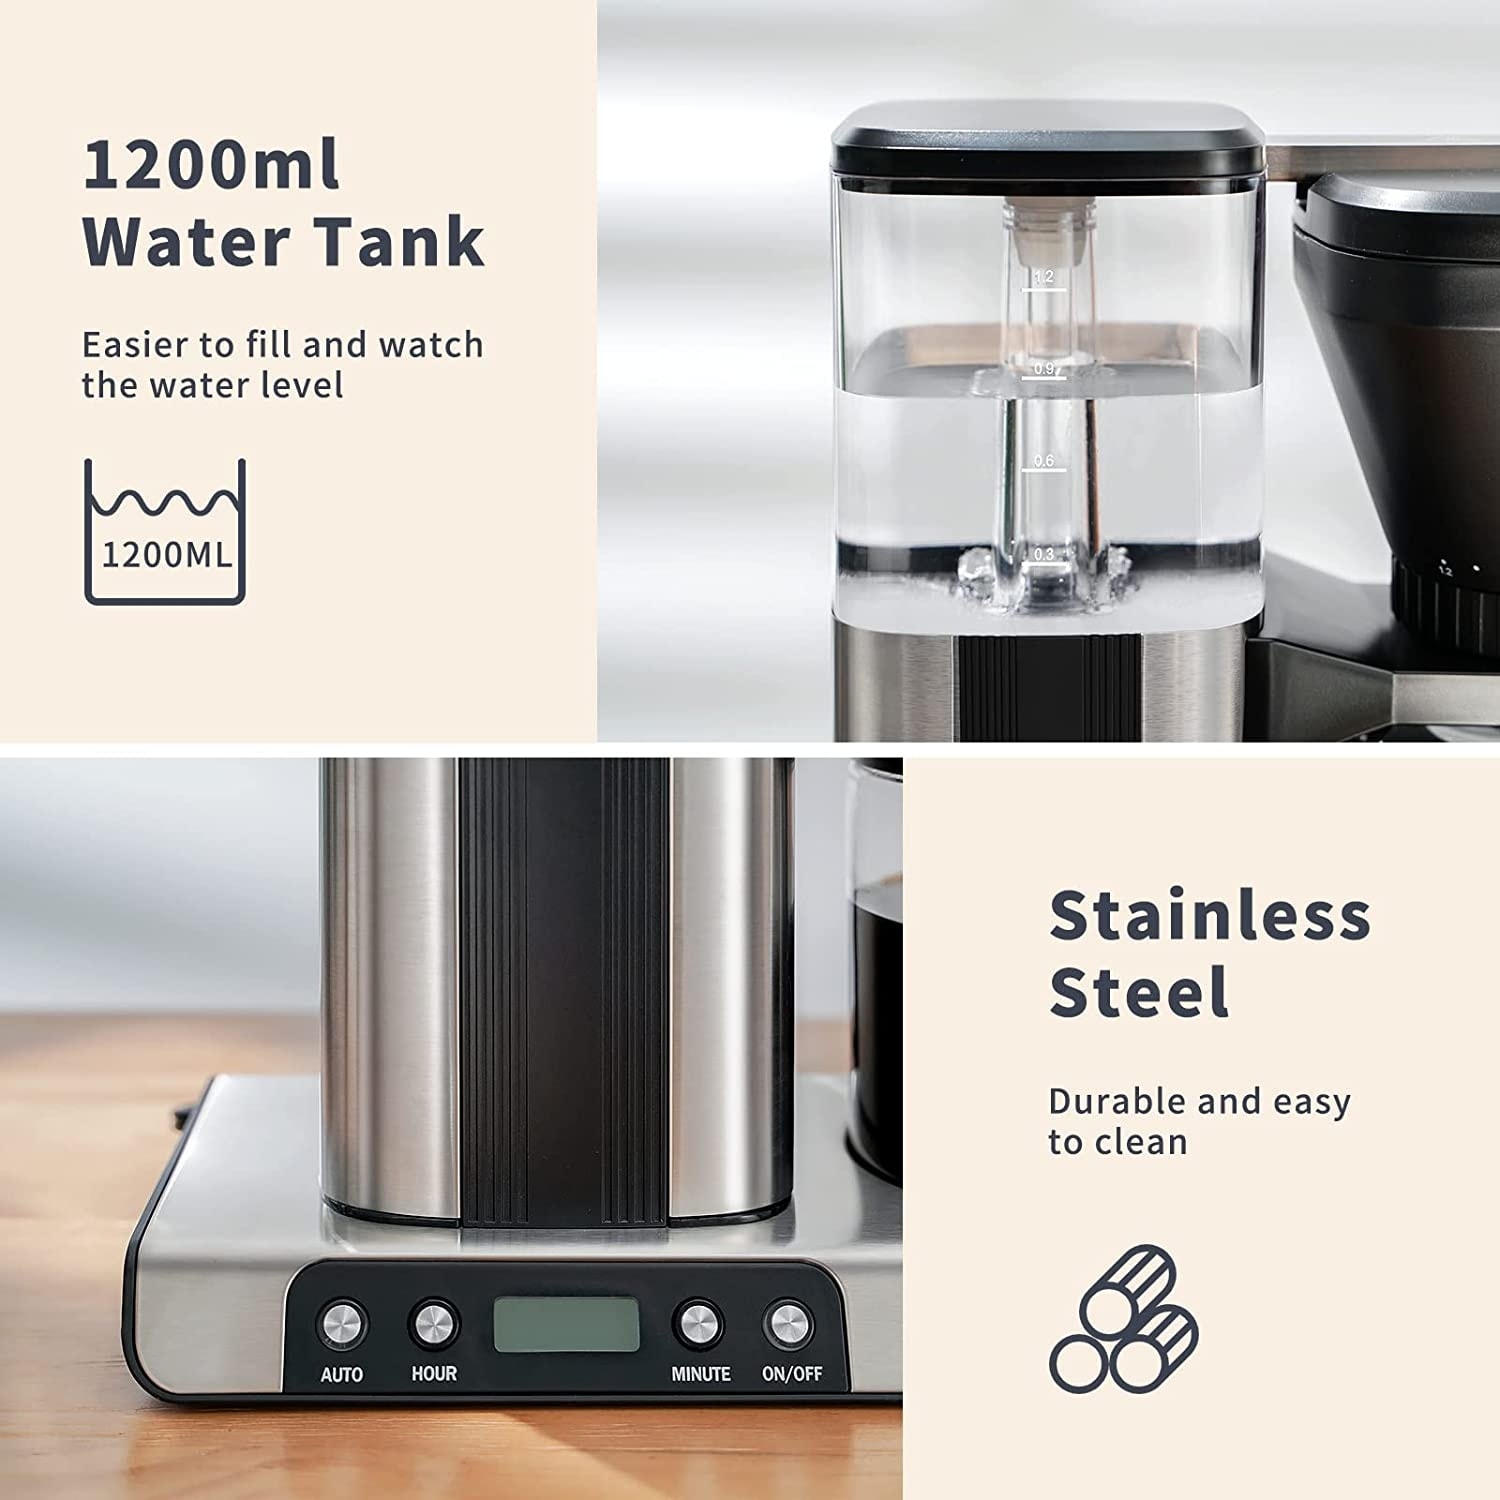 https://ak1.ostkcdn.com/images/products/is/images/direct/f2ab95c7d9b873cb03236023521cedab6f746aad/House-Coffee-Maker%2C-8-Cup-Drip-Coffee-Machine-with-Stainless-Steel%2C-One-Touch-Brewing-and-Adjustable-Strength.jpg